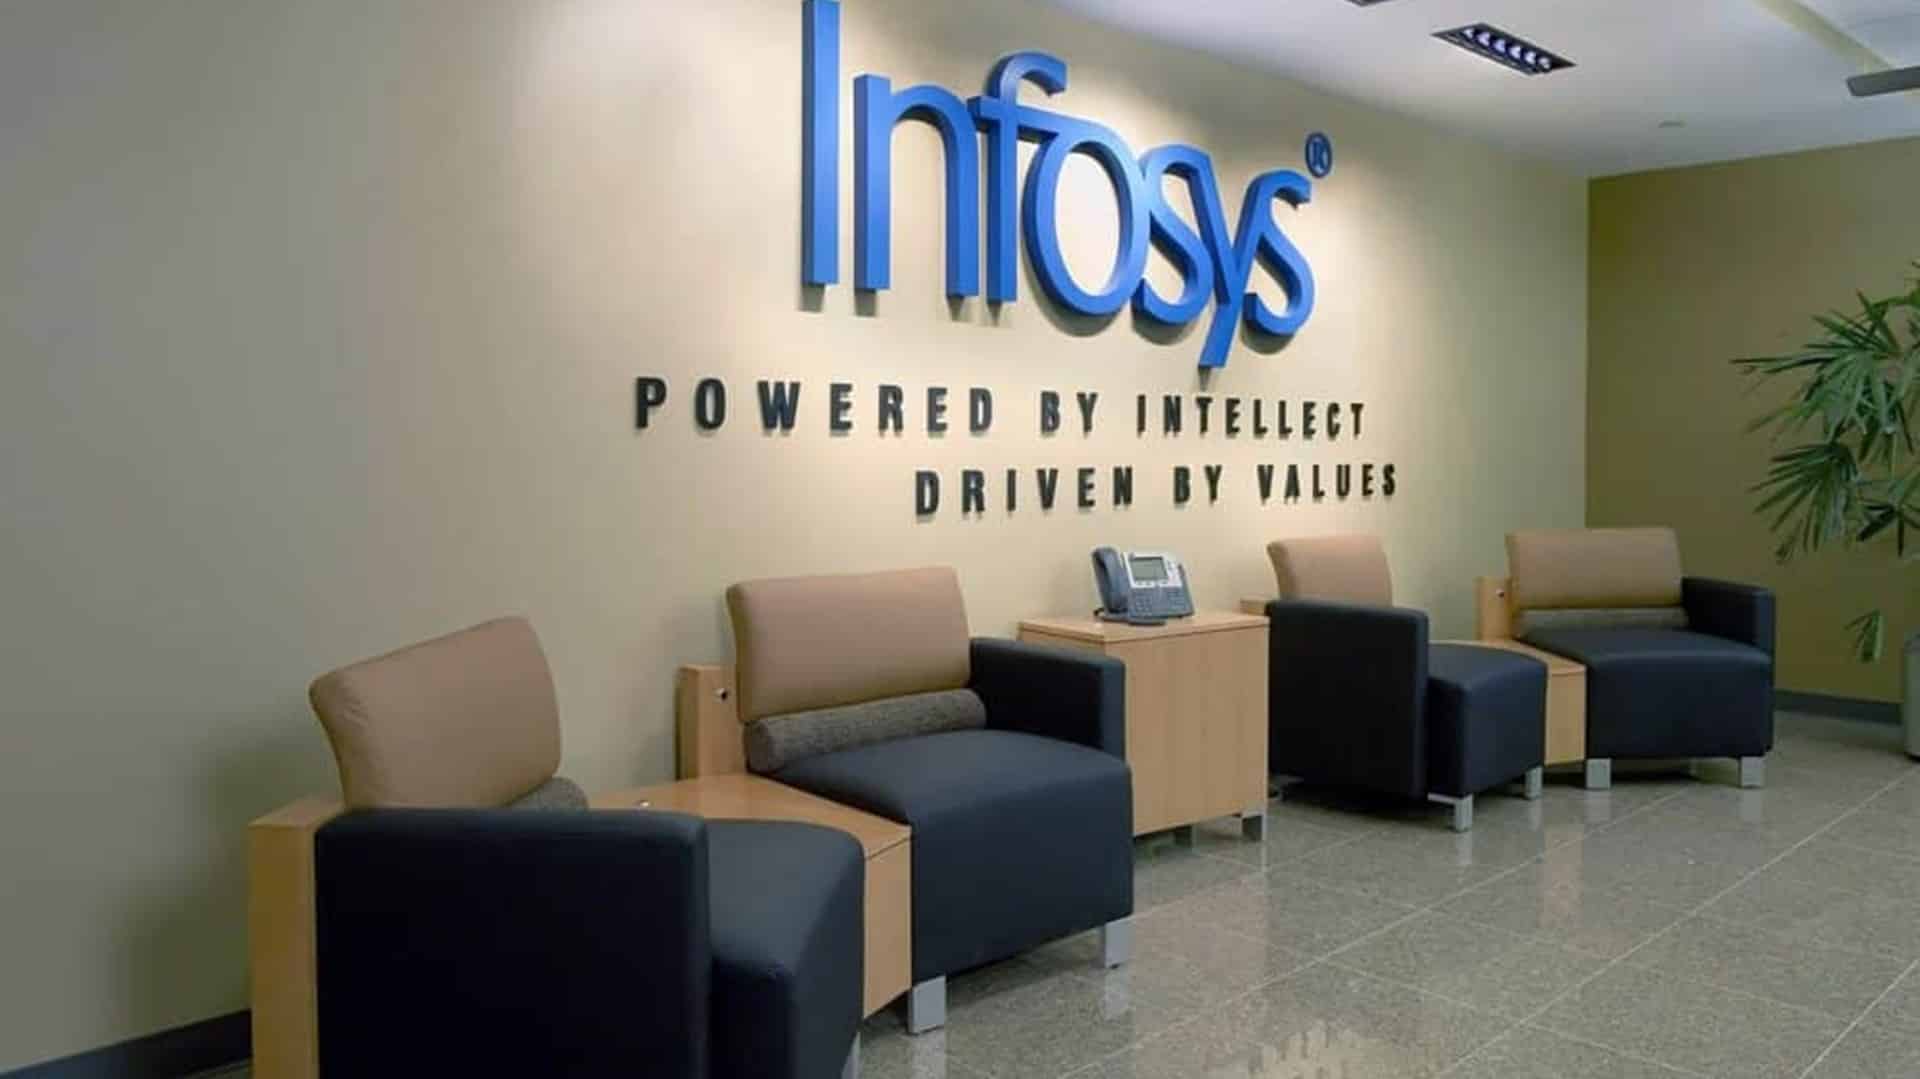 Infosys, CSC join hands to upskill 6 crore rural citizens across India